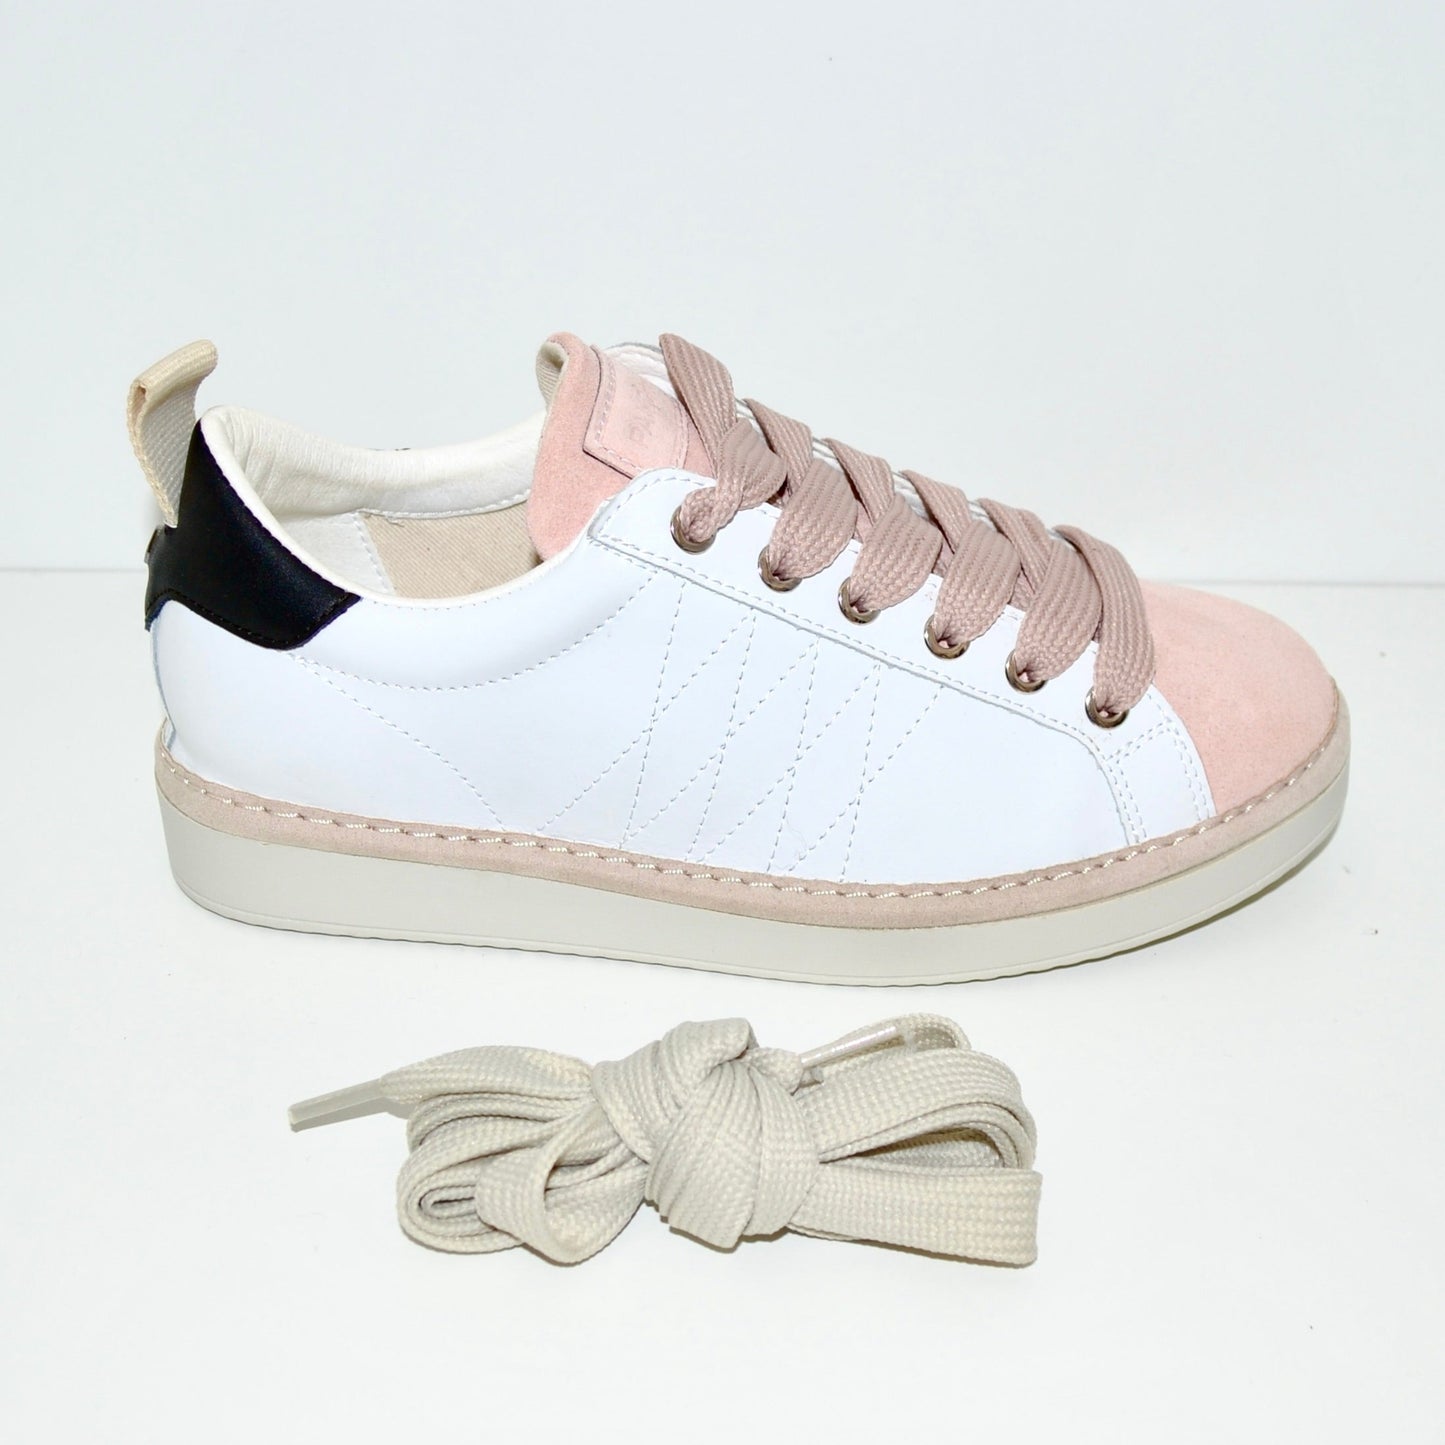 Sneakers Panchic woman white leather and pink suede